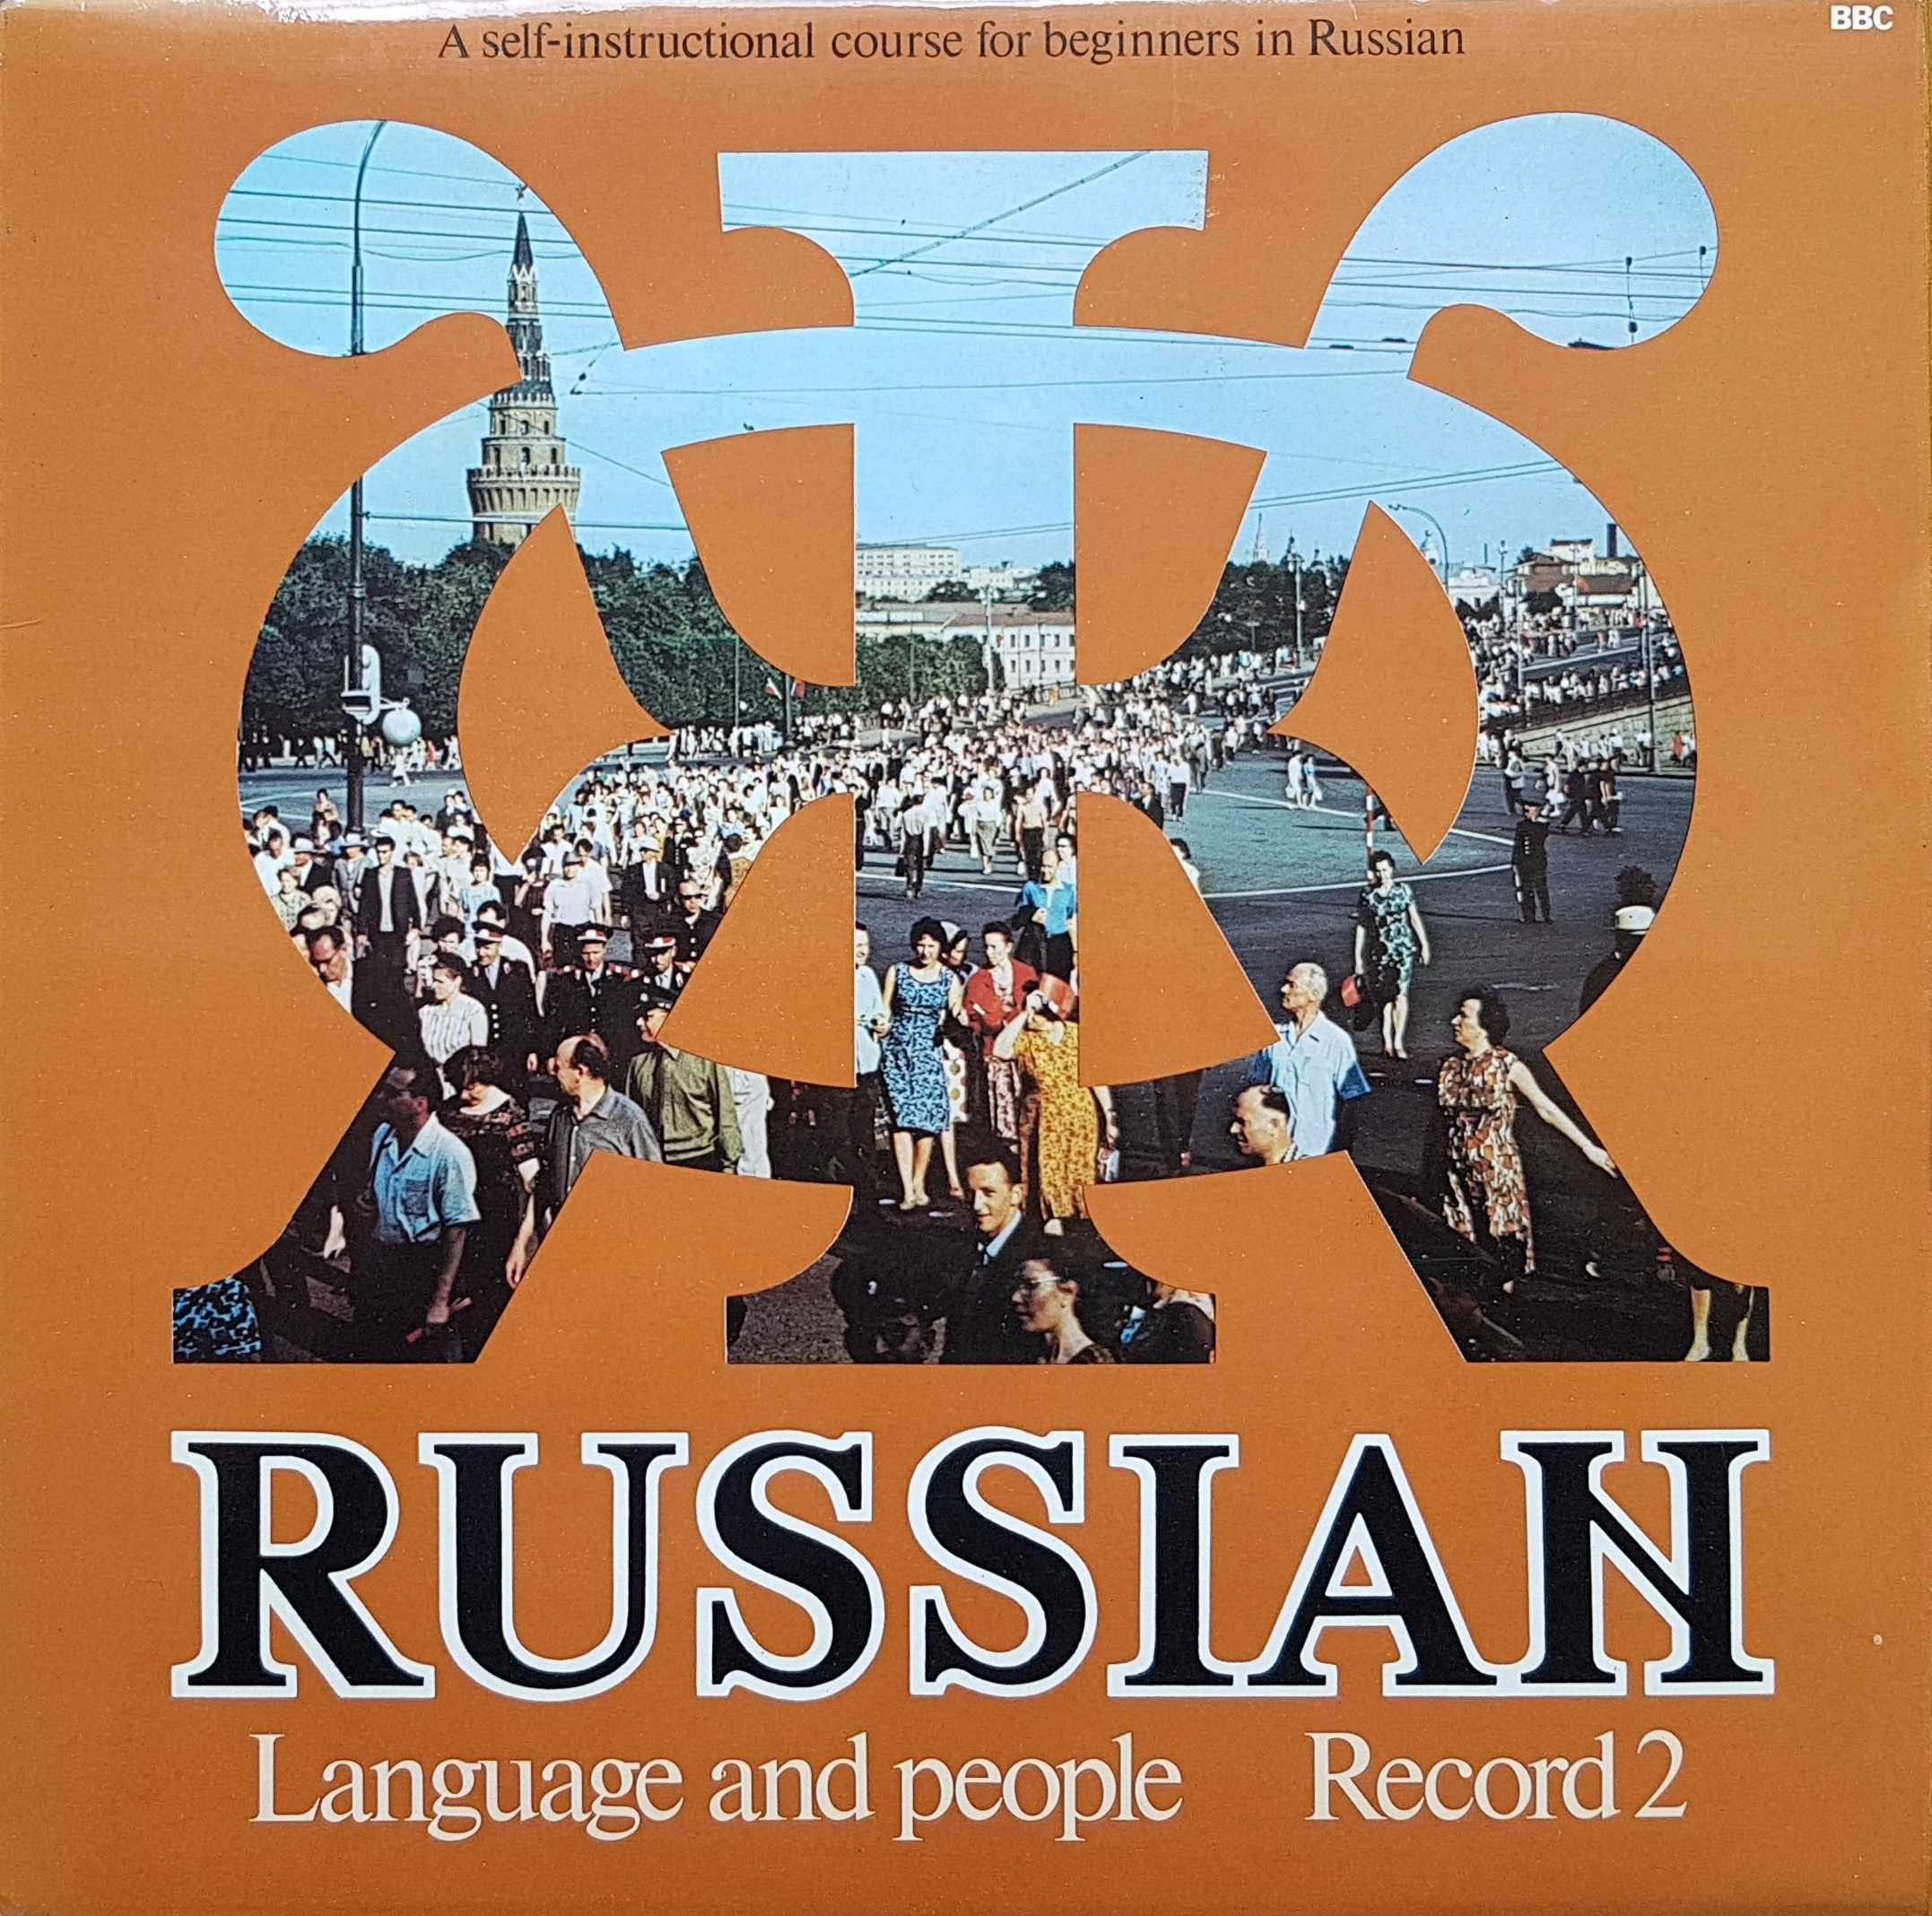 Picture of OP 249 Russian Language And People - Record 2 A self-instructional course for beginners in Russian by artist Terry Culhane from the BBC albums - Records and Tapes library